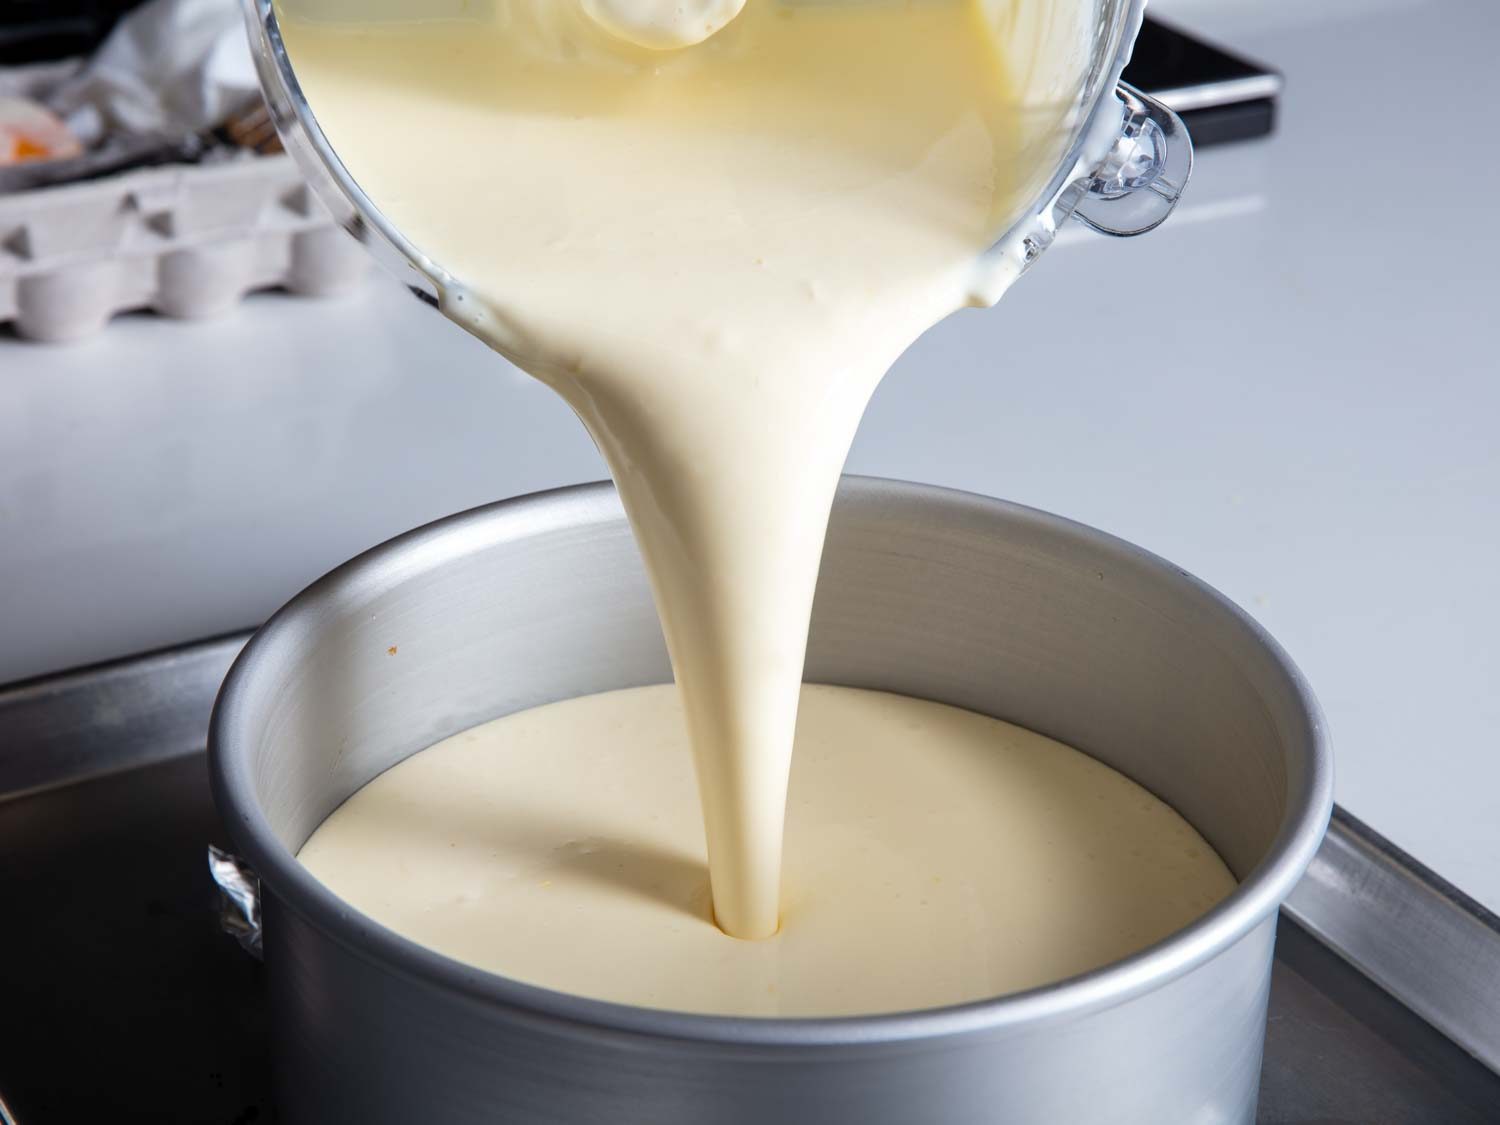 pouring the creamy cheesecake batter into the prepared pan